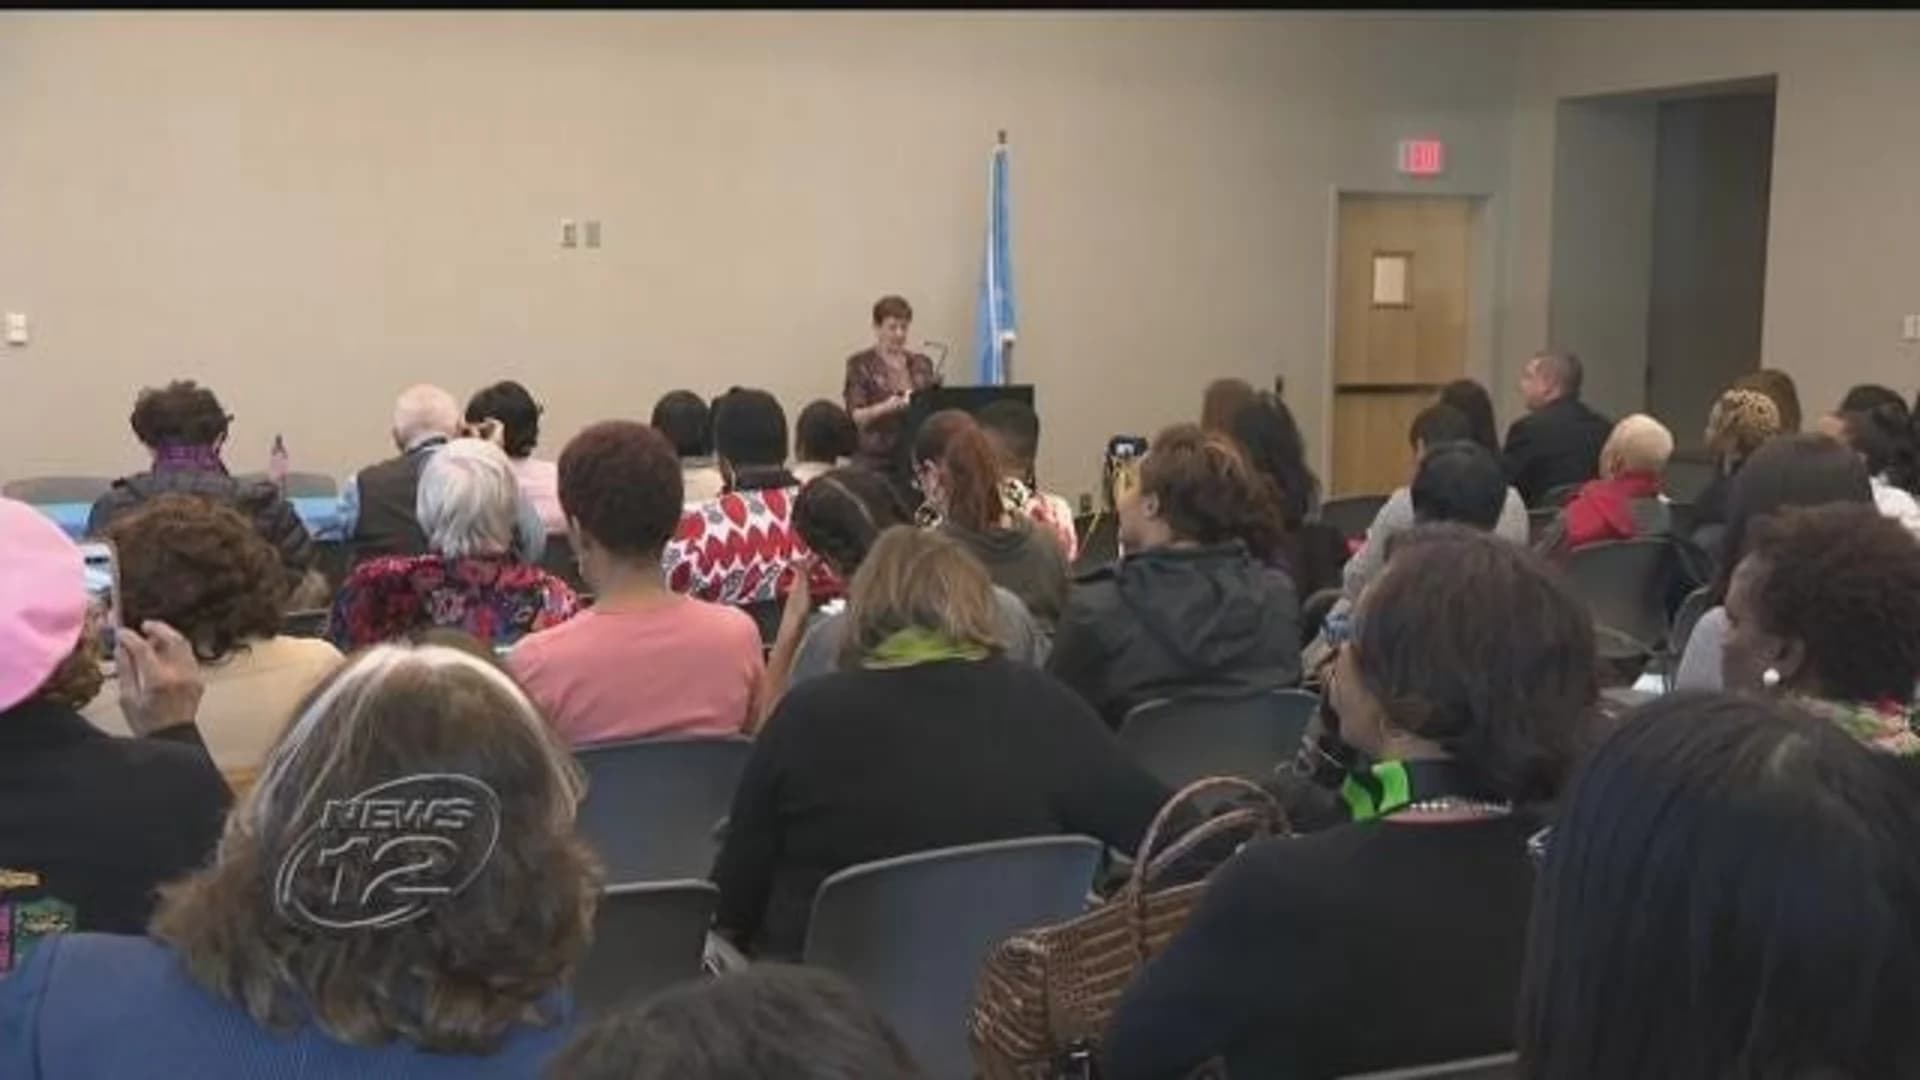 International Women’s Day event held in Yonkers